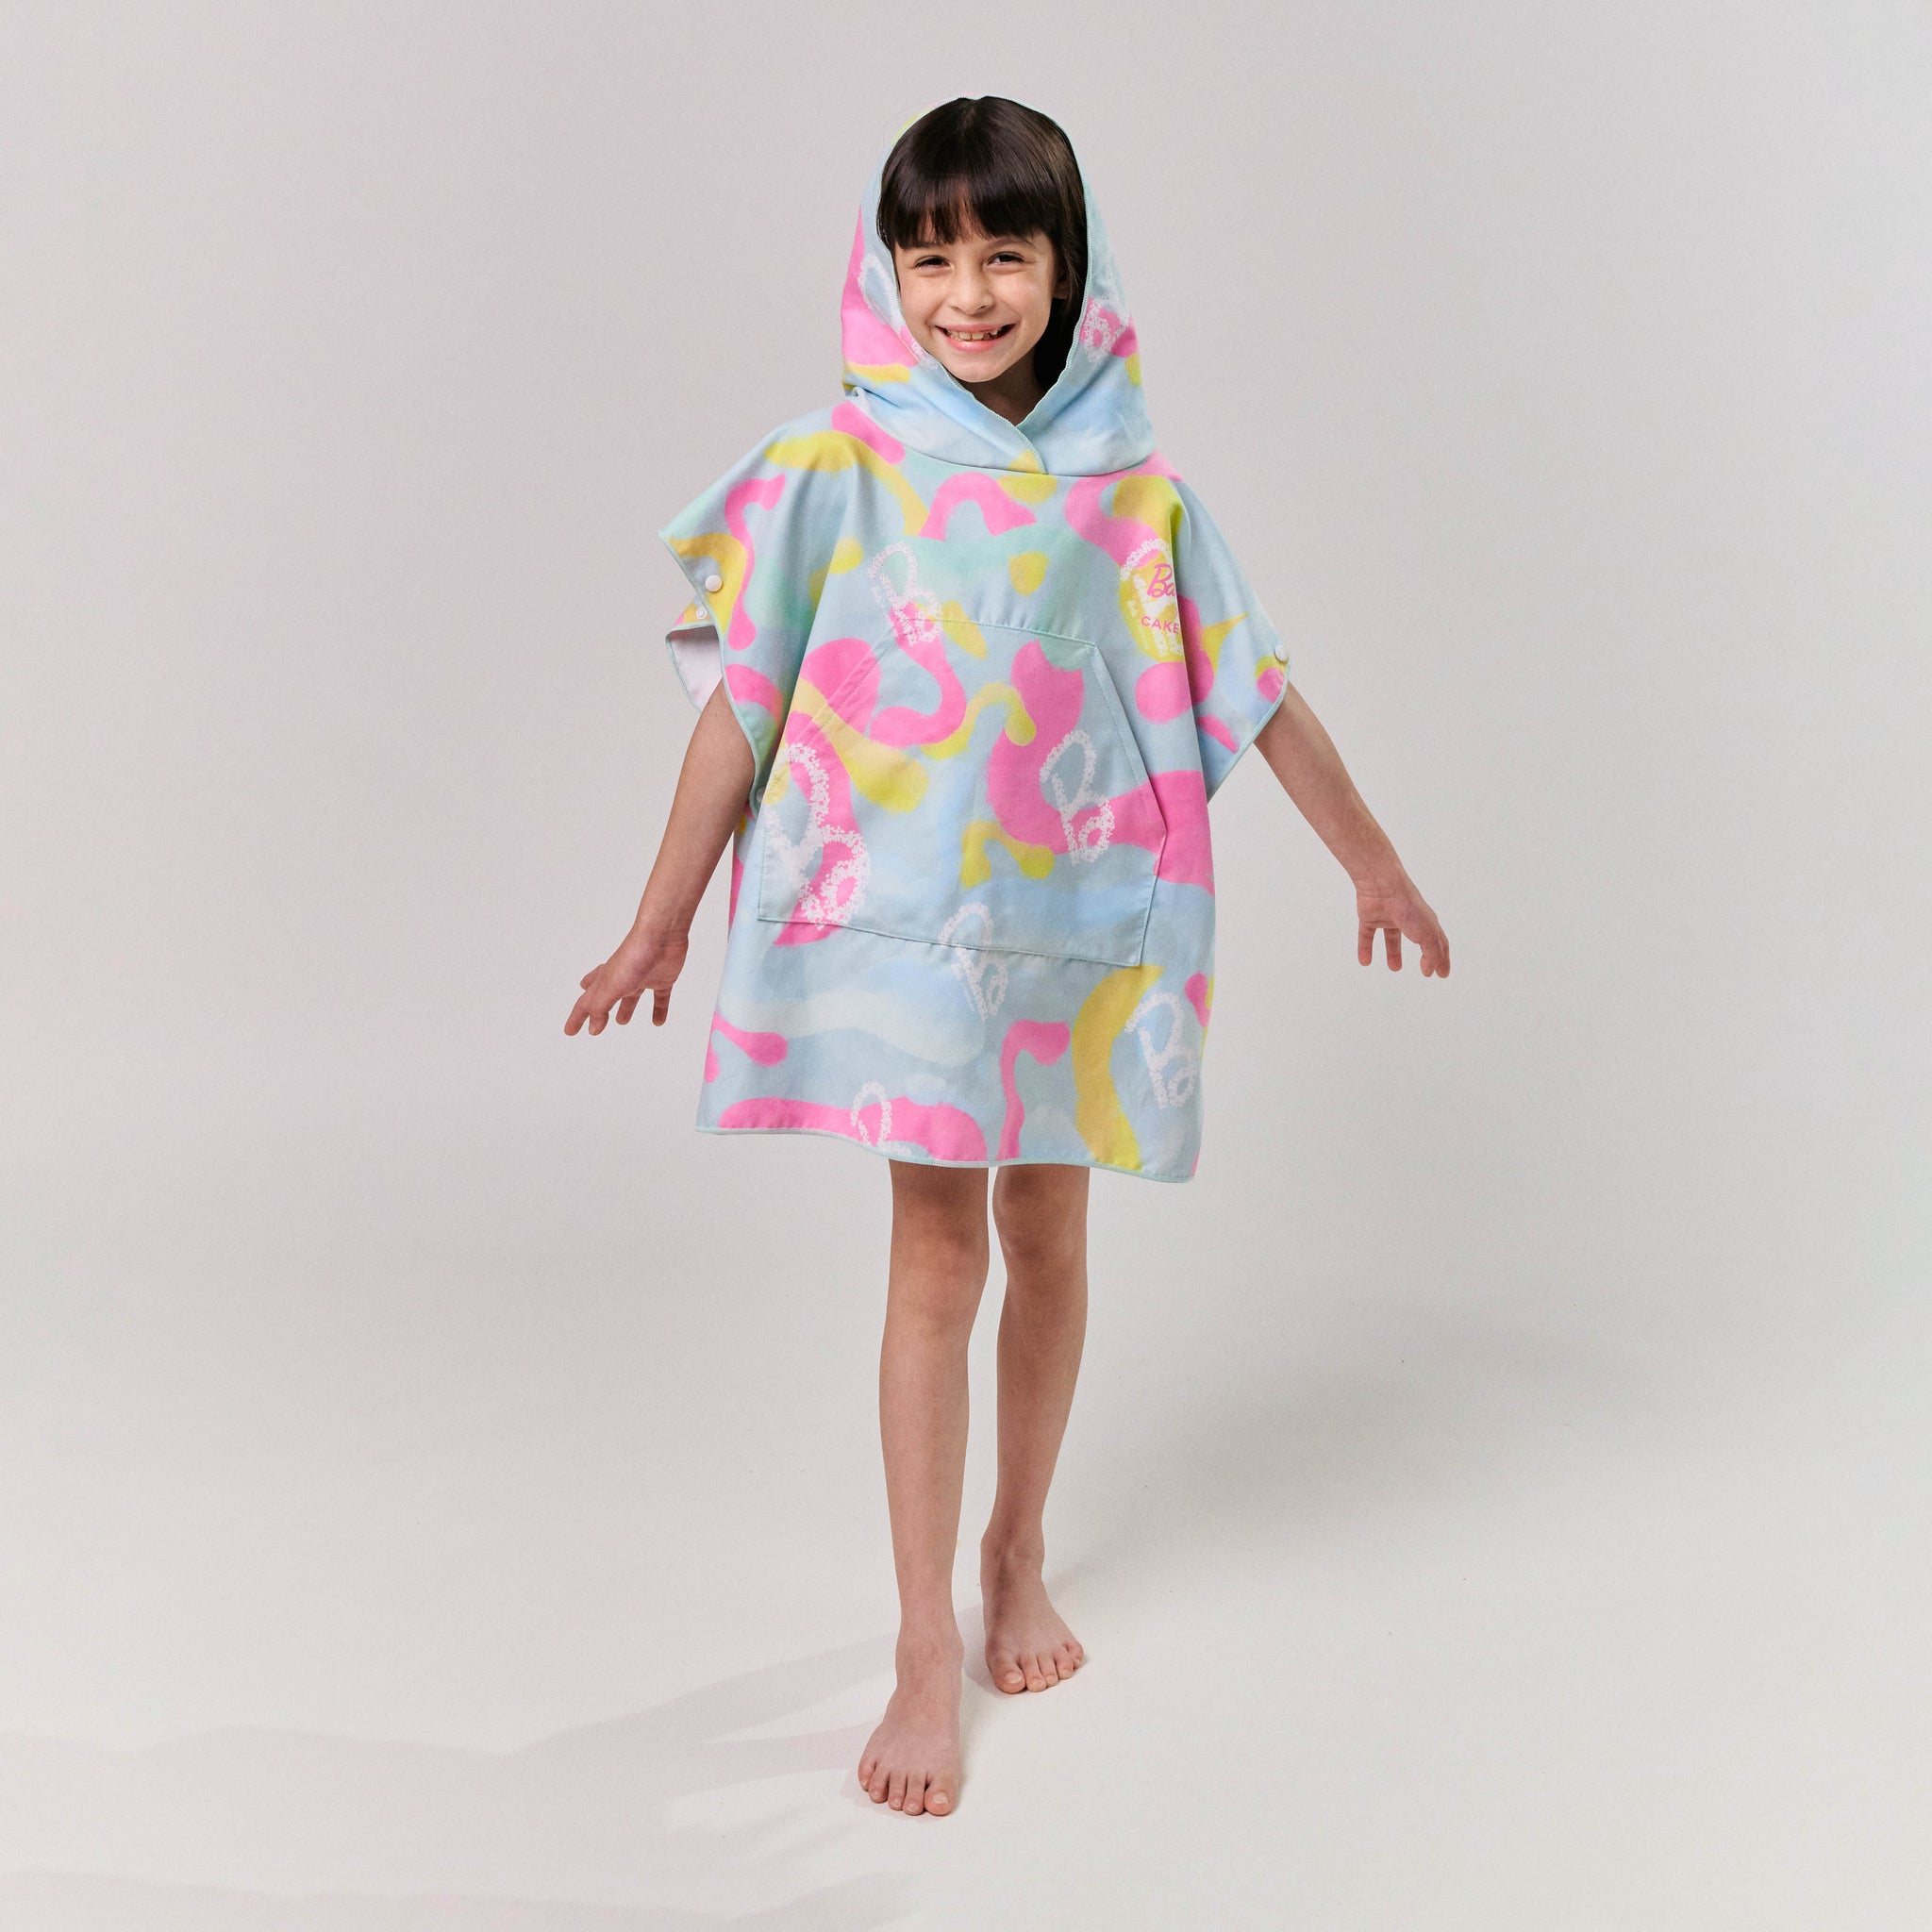 PONCHO KIDS TOWEL MELODY IN BLUE PINK